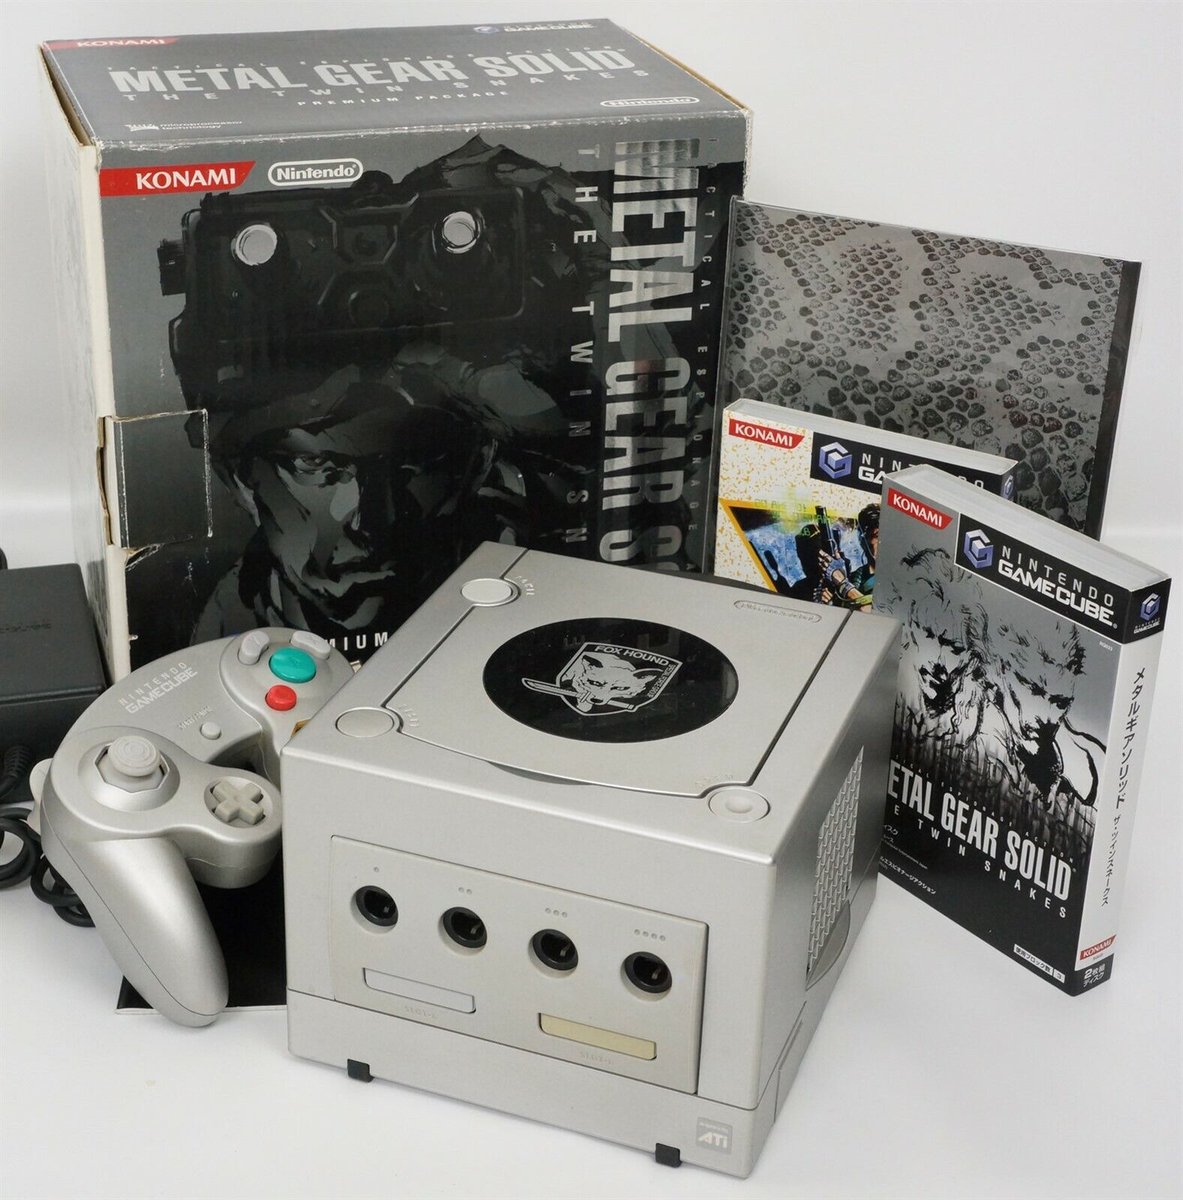 A friendly reminder that a Metal Gear Solid Twin Snakes Nintendo Gamecube Exists!